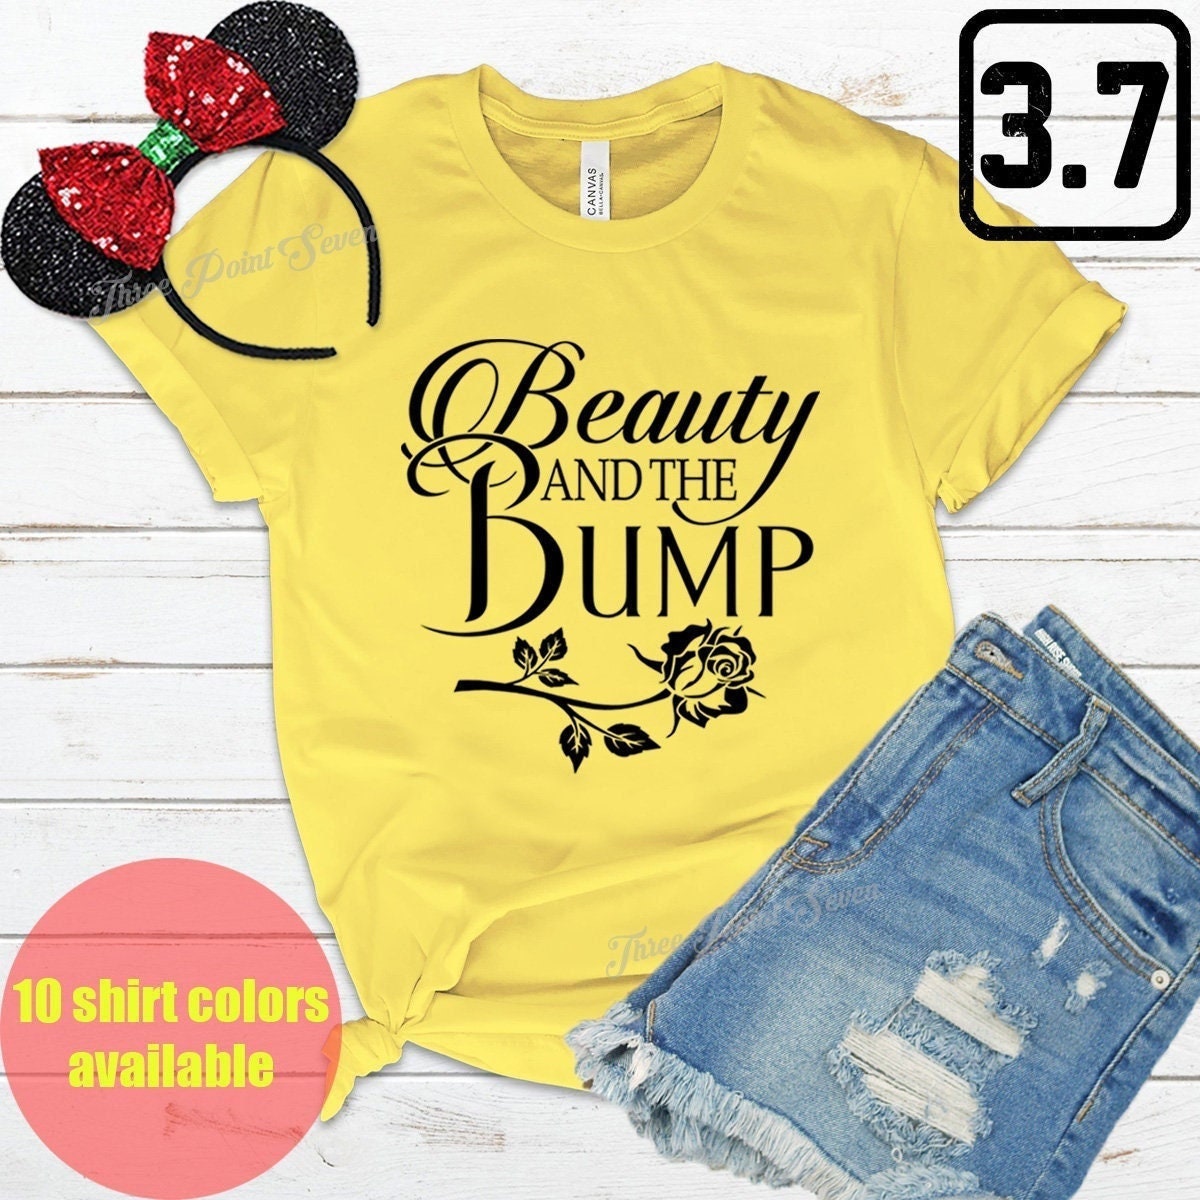 Beauty and The Bump, Beast Behind The Bump Shirt, Beauty and the Beast  Disney Shirt, Pregnancy Announcement, Family Party, Baby Shower Shirt -   Portugal